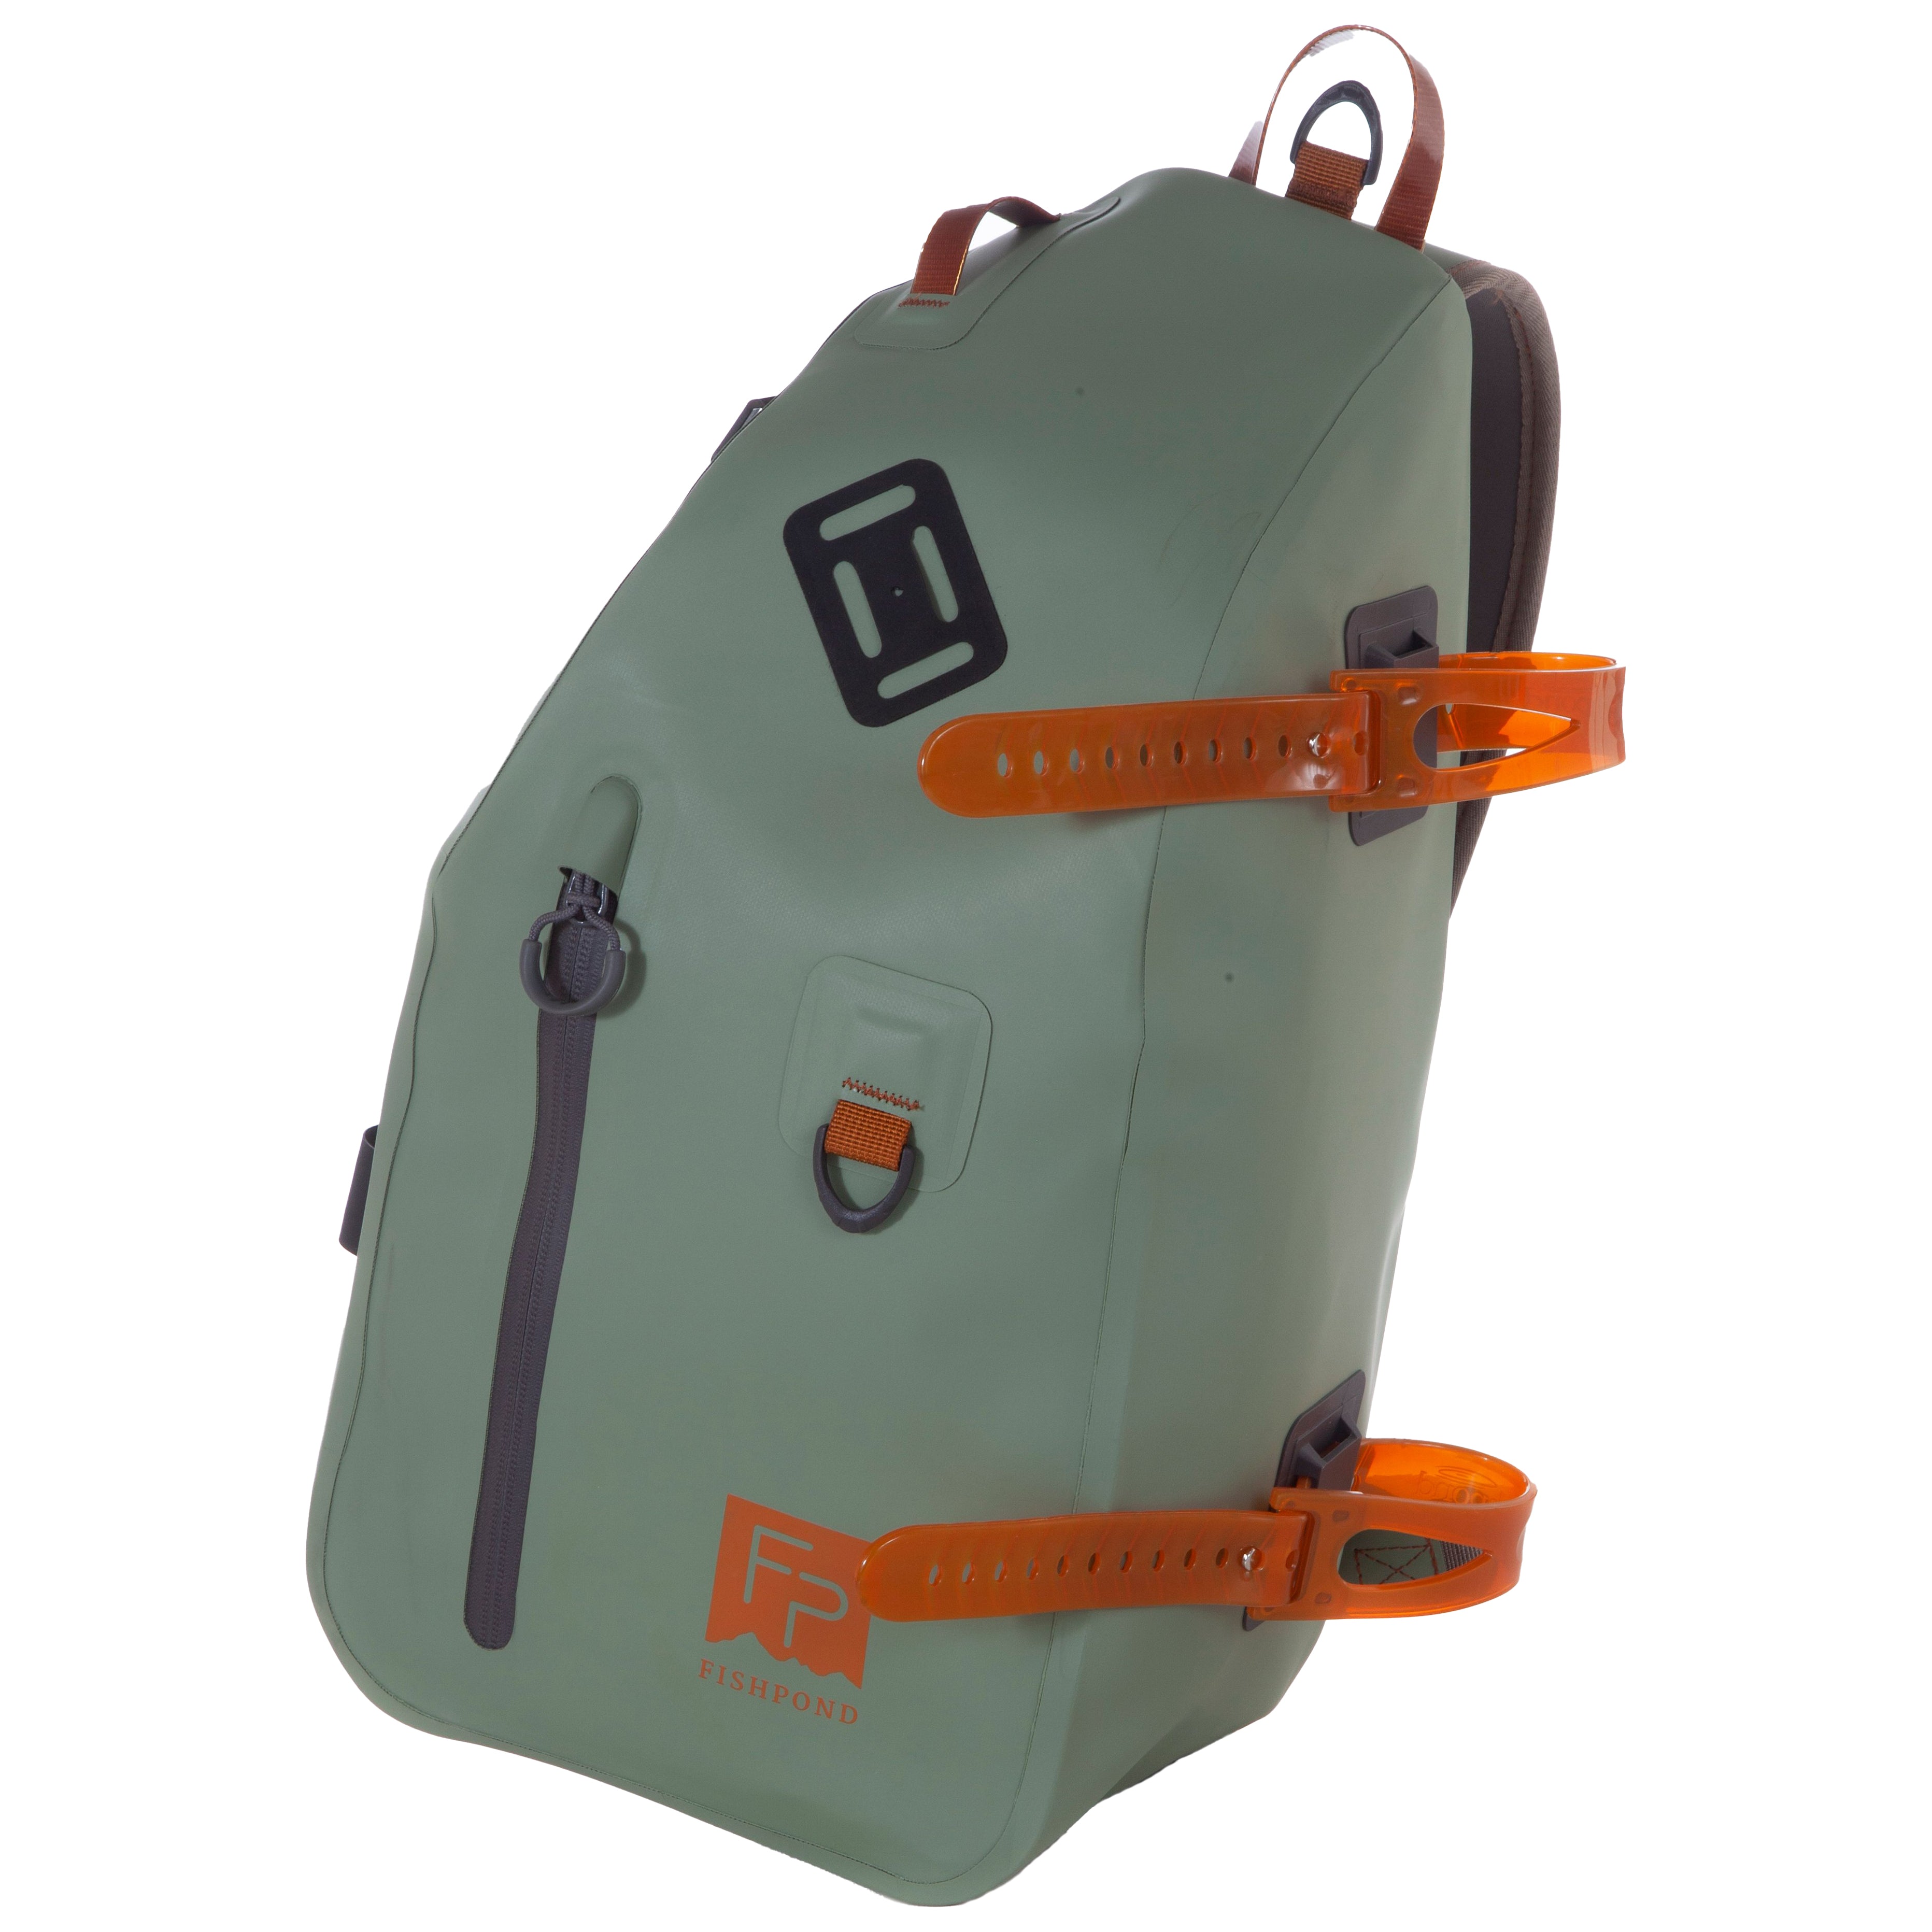 Fishpond Flathead Sling Pack  Ambidextrous Fly Fishing Sling Pack